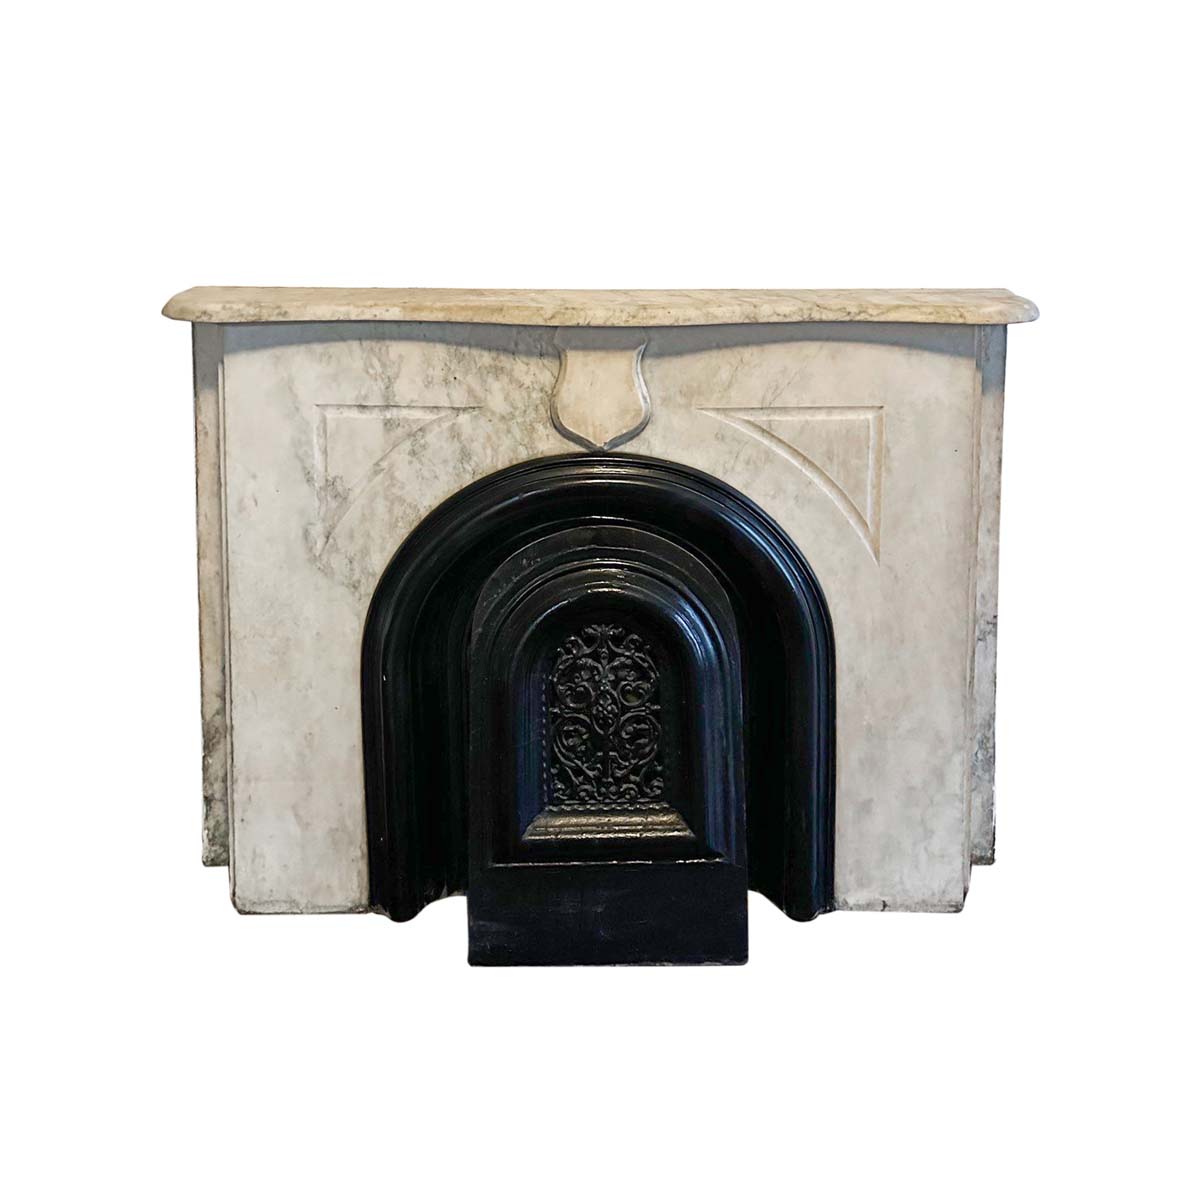 Marble Mantel - 1881 Simple Arched Gray & White Marble Mantel